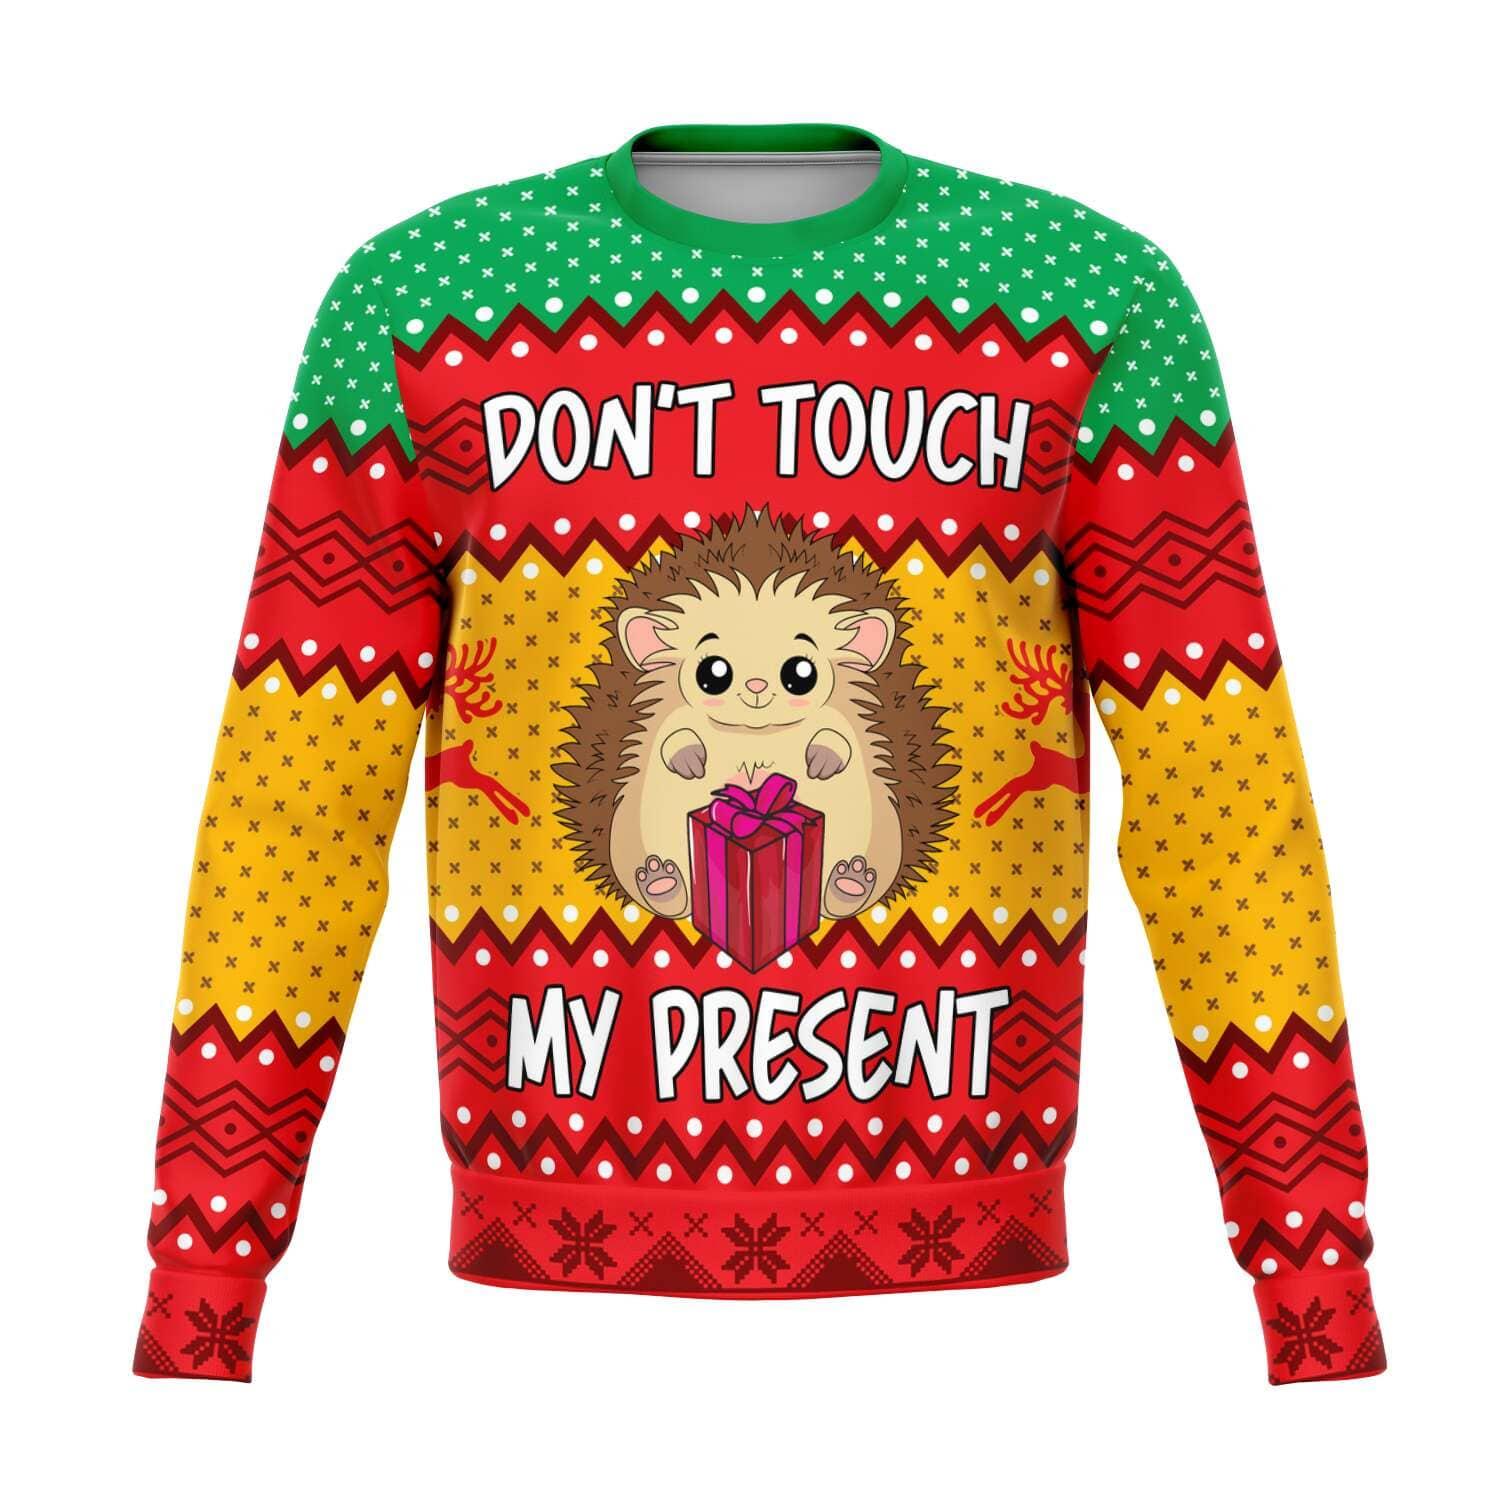 Don't touch my Present Unisex Ugly Christmas Sweatshirt